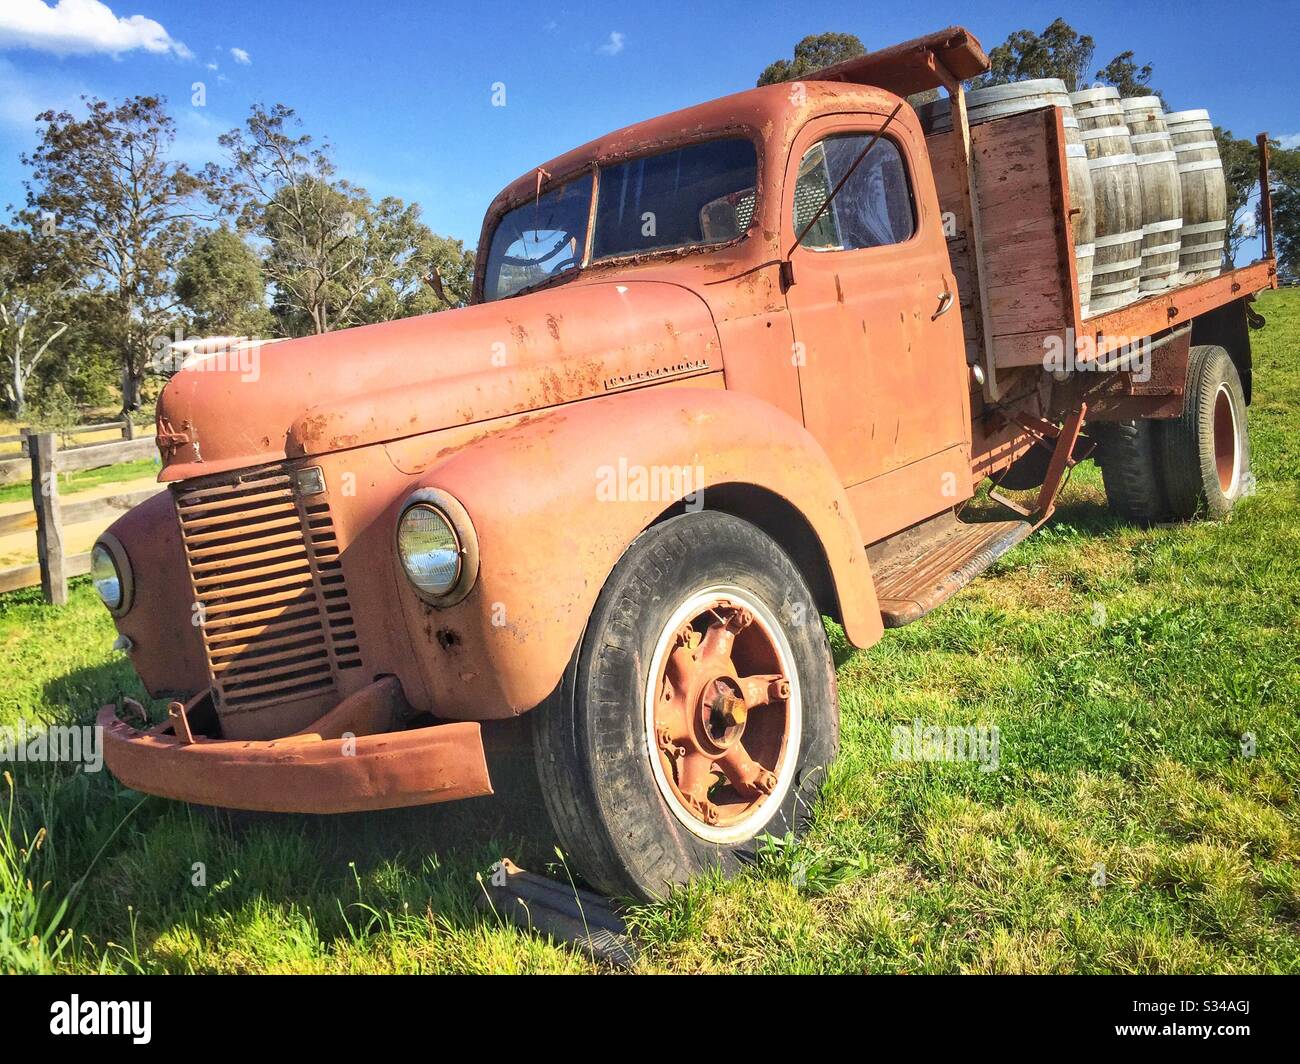 An old, disused International truck marks the entrance to a small vineyard in the Megalong Valley, to the west of the Blue Mountains, NSW, Australia Stock Photo